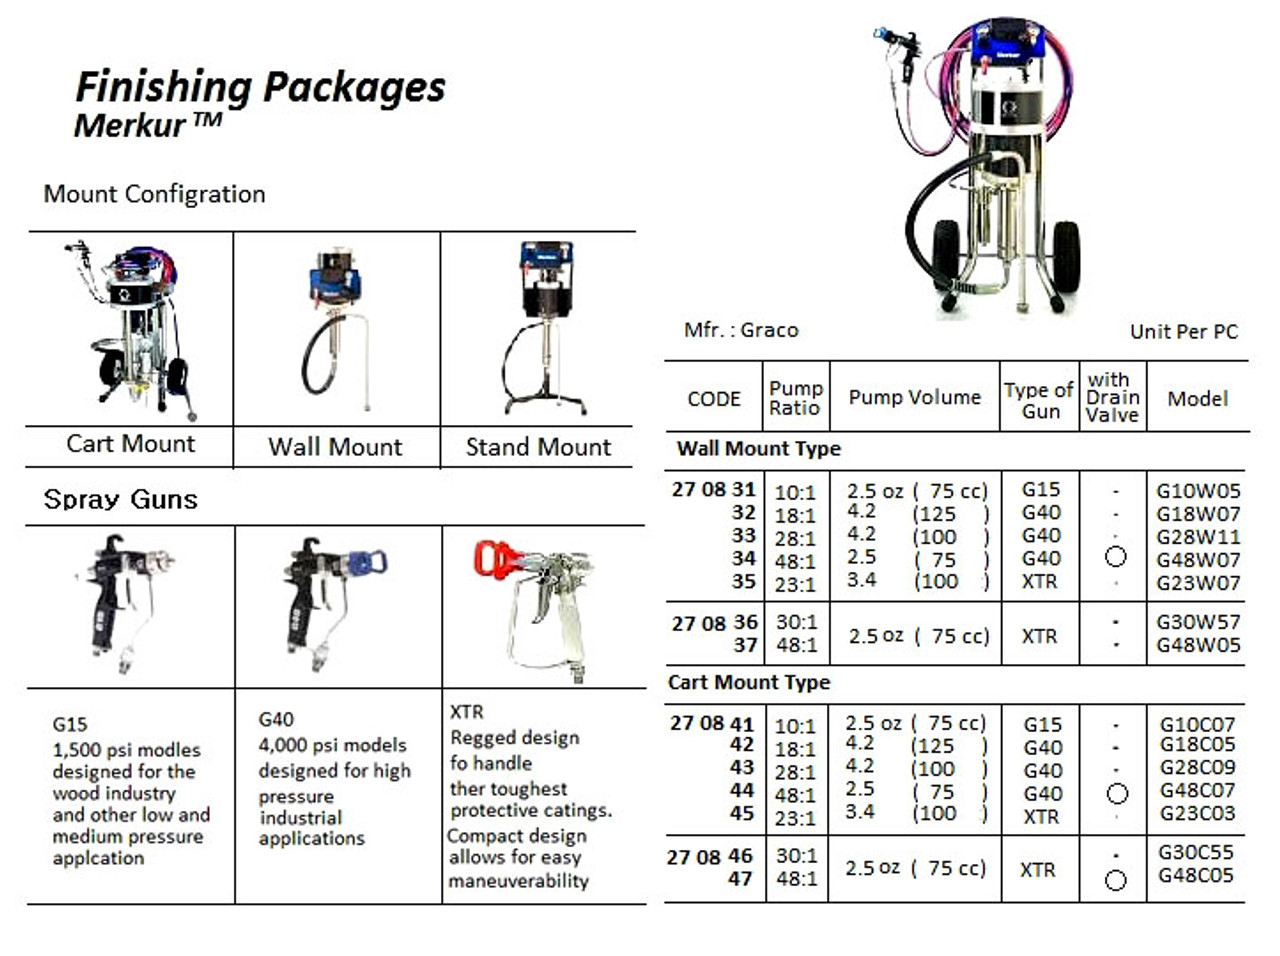 IMPA 270833 Finishing package, ratio 28:1 - pump volume 125cc Graco Merkur 28:1 G18W11 (wall mounted) > on request